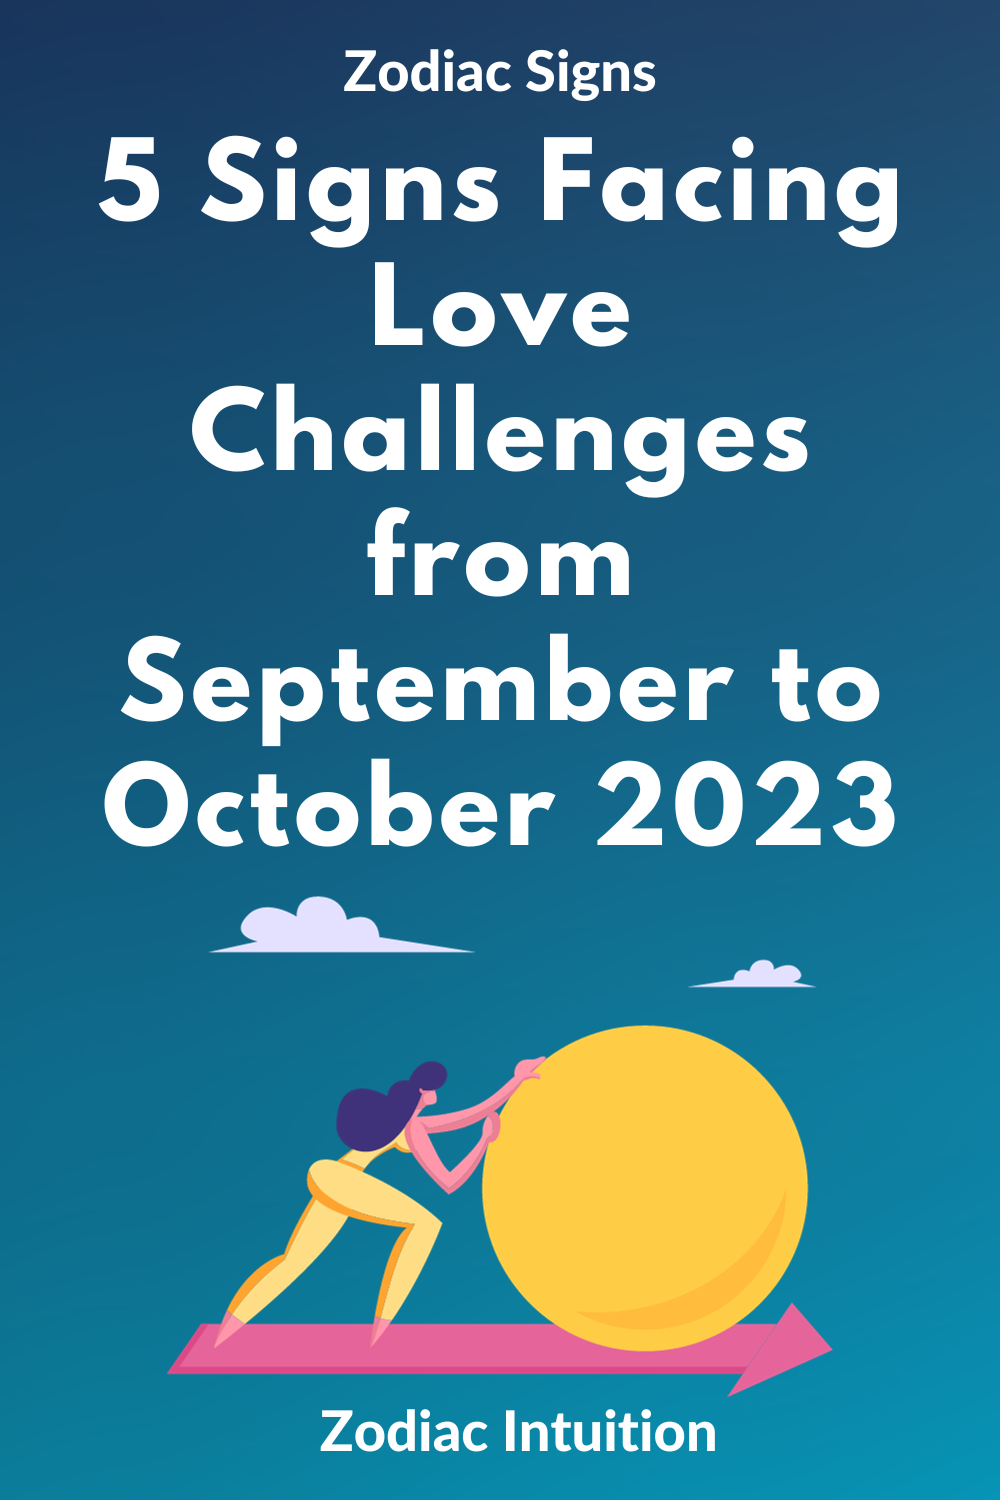 5 Signs Facing Love Challenges from September to October 2023